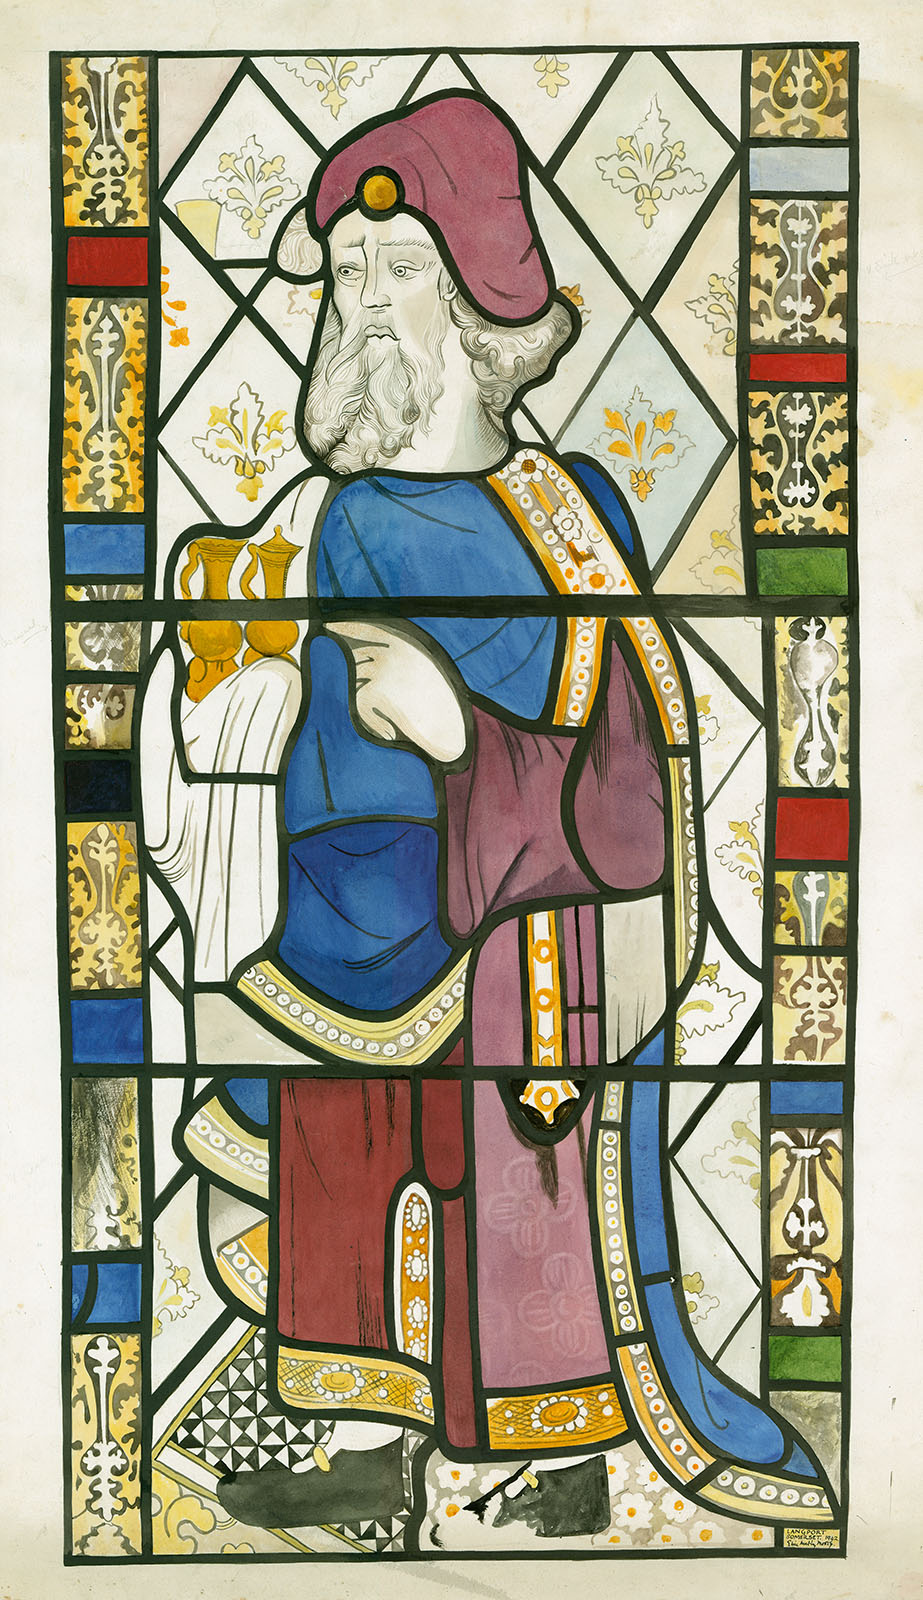 Colour illustration of a stained glass window.